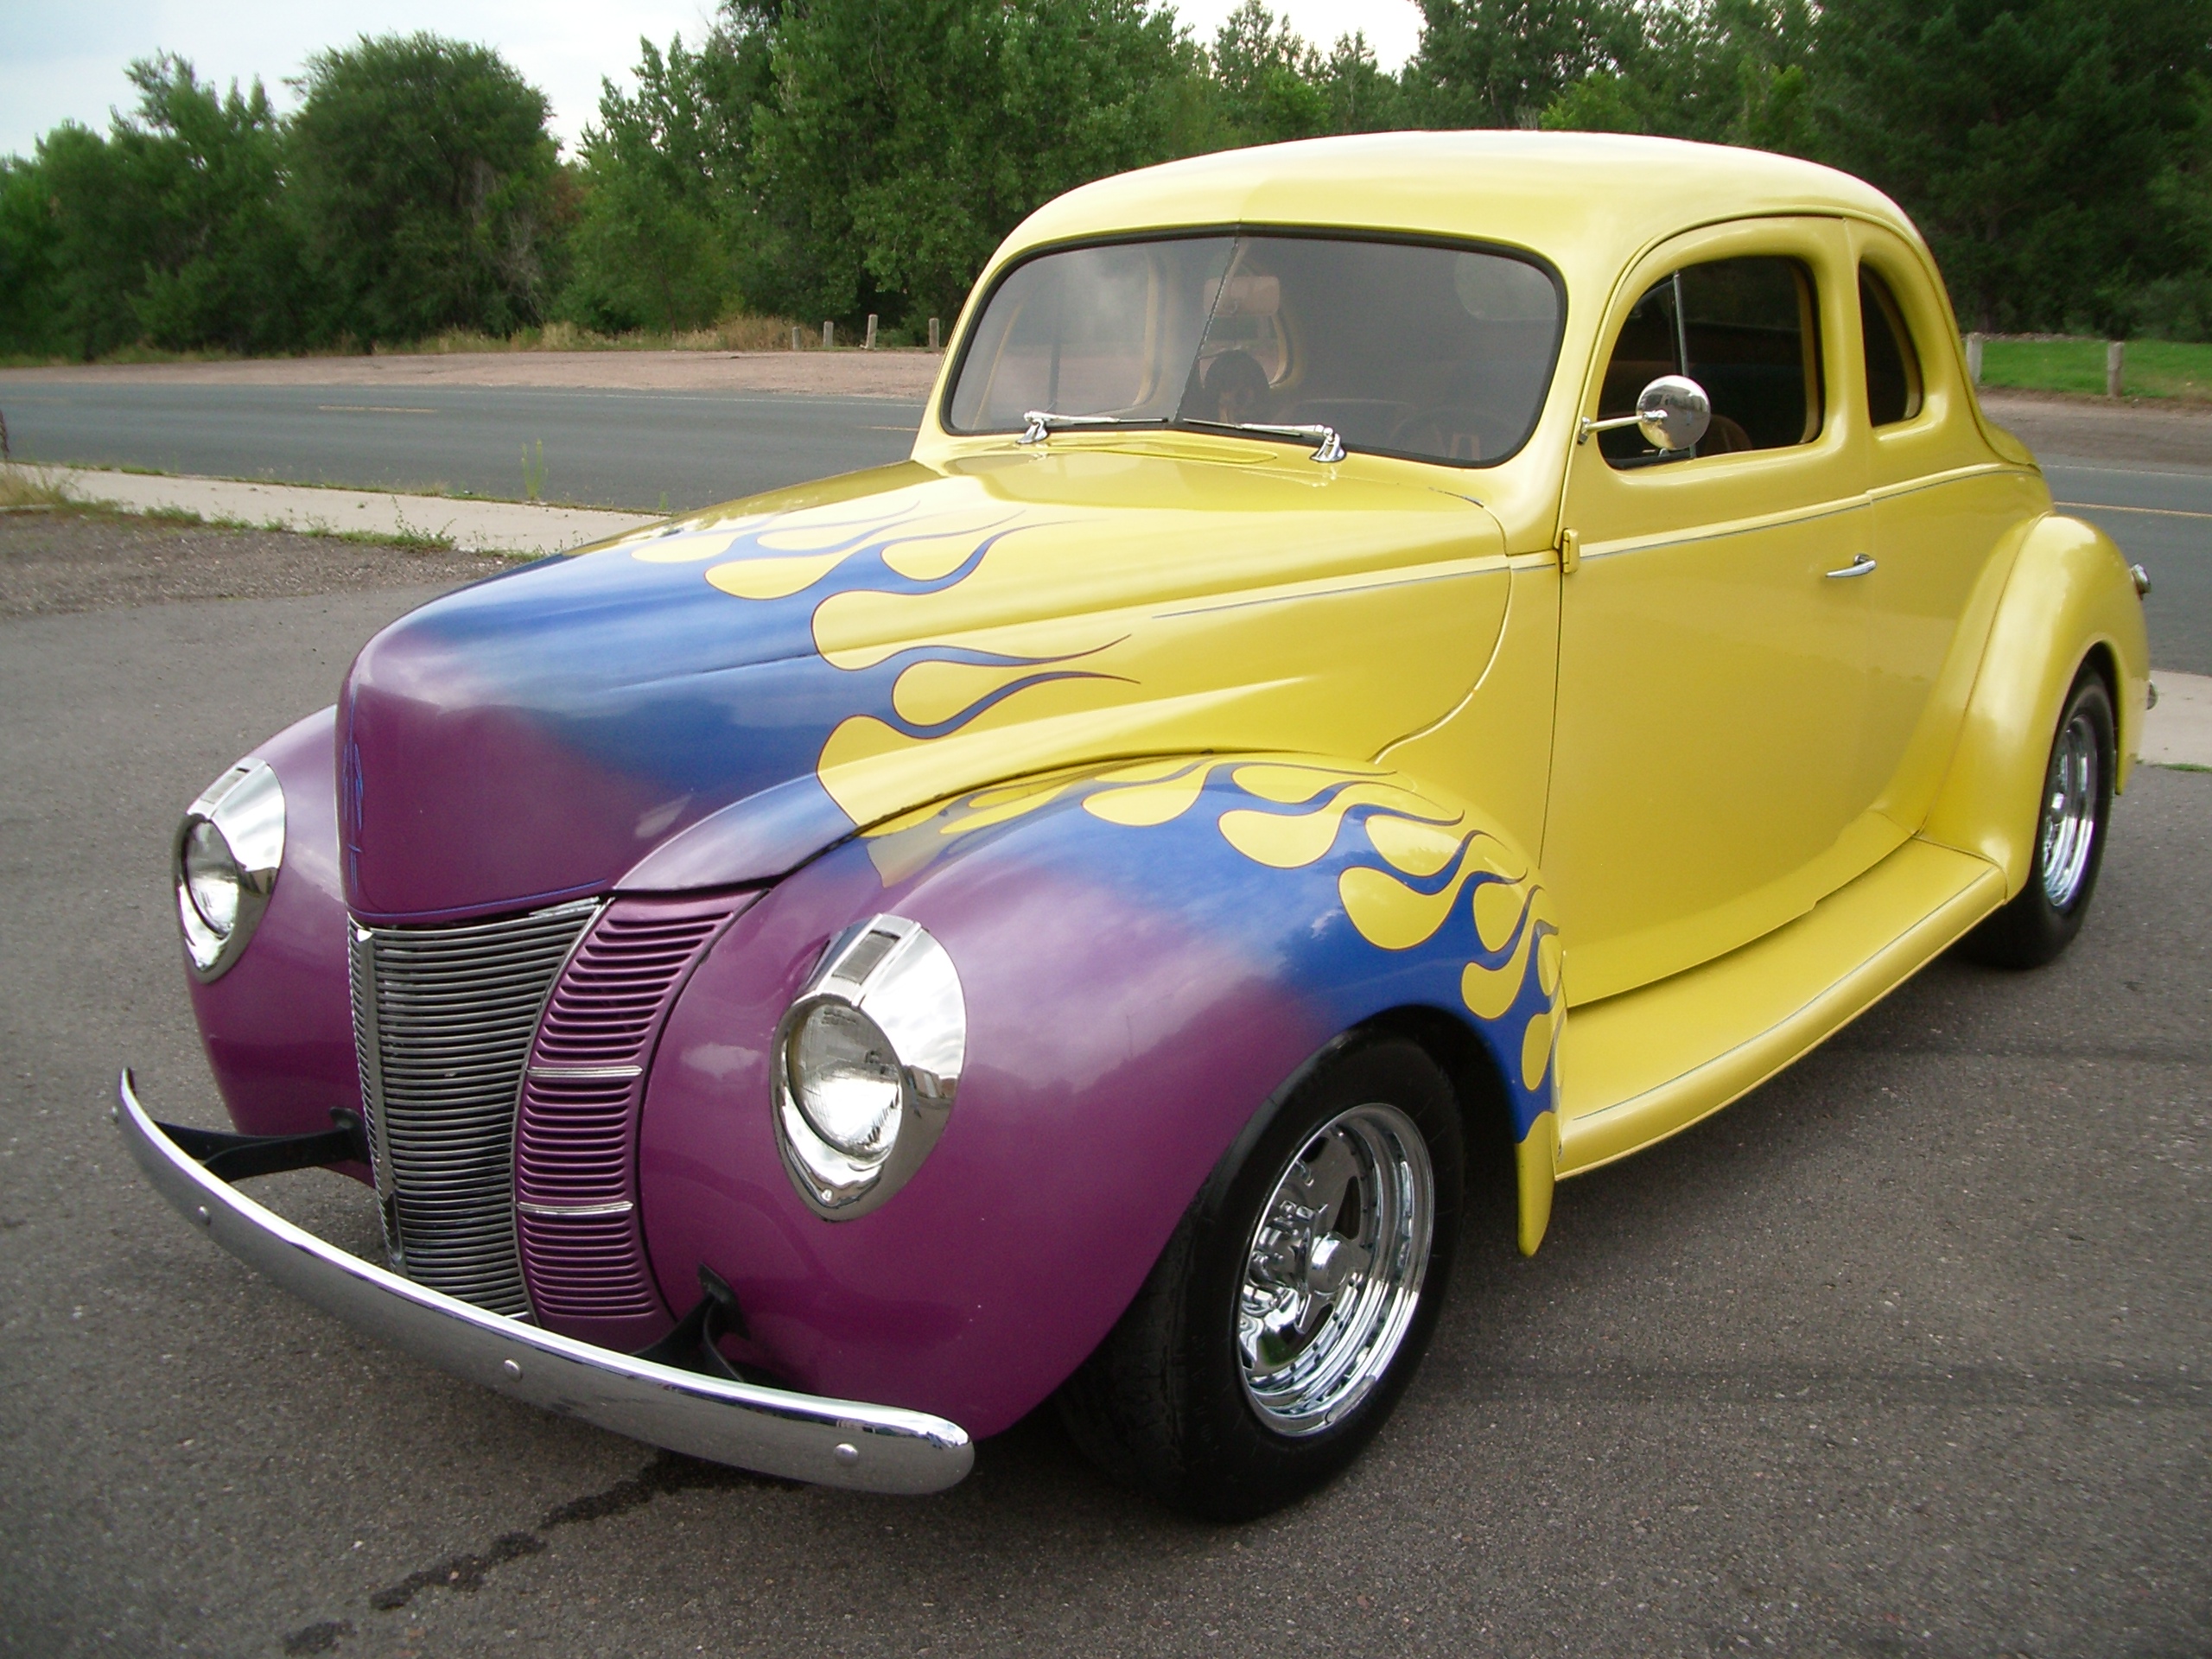 1940 Ford Deluxe Coupe.